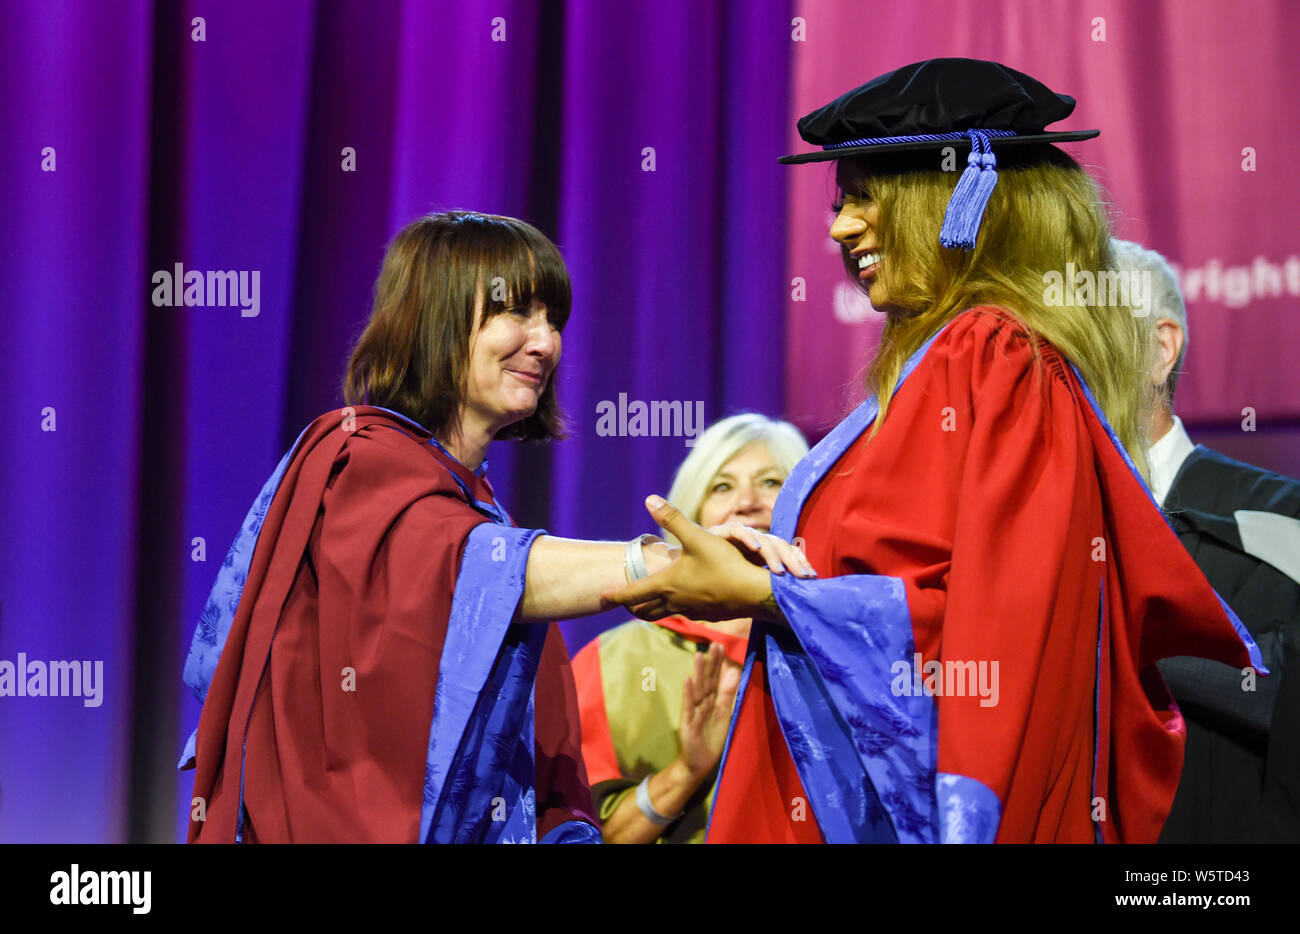 Brighton UK 30th July 2019 - Famous transgender model Munroe Bergdorf (right) after receiving an honorary doctor of letters at the University of Brighton graduation ceremony greets her lecturer Dr Jessica Moriarty . Credit : Simon Dack / Alamy Live News Stock Photo